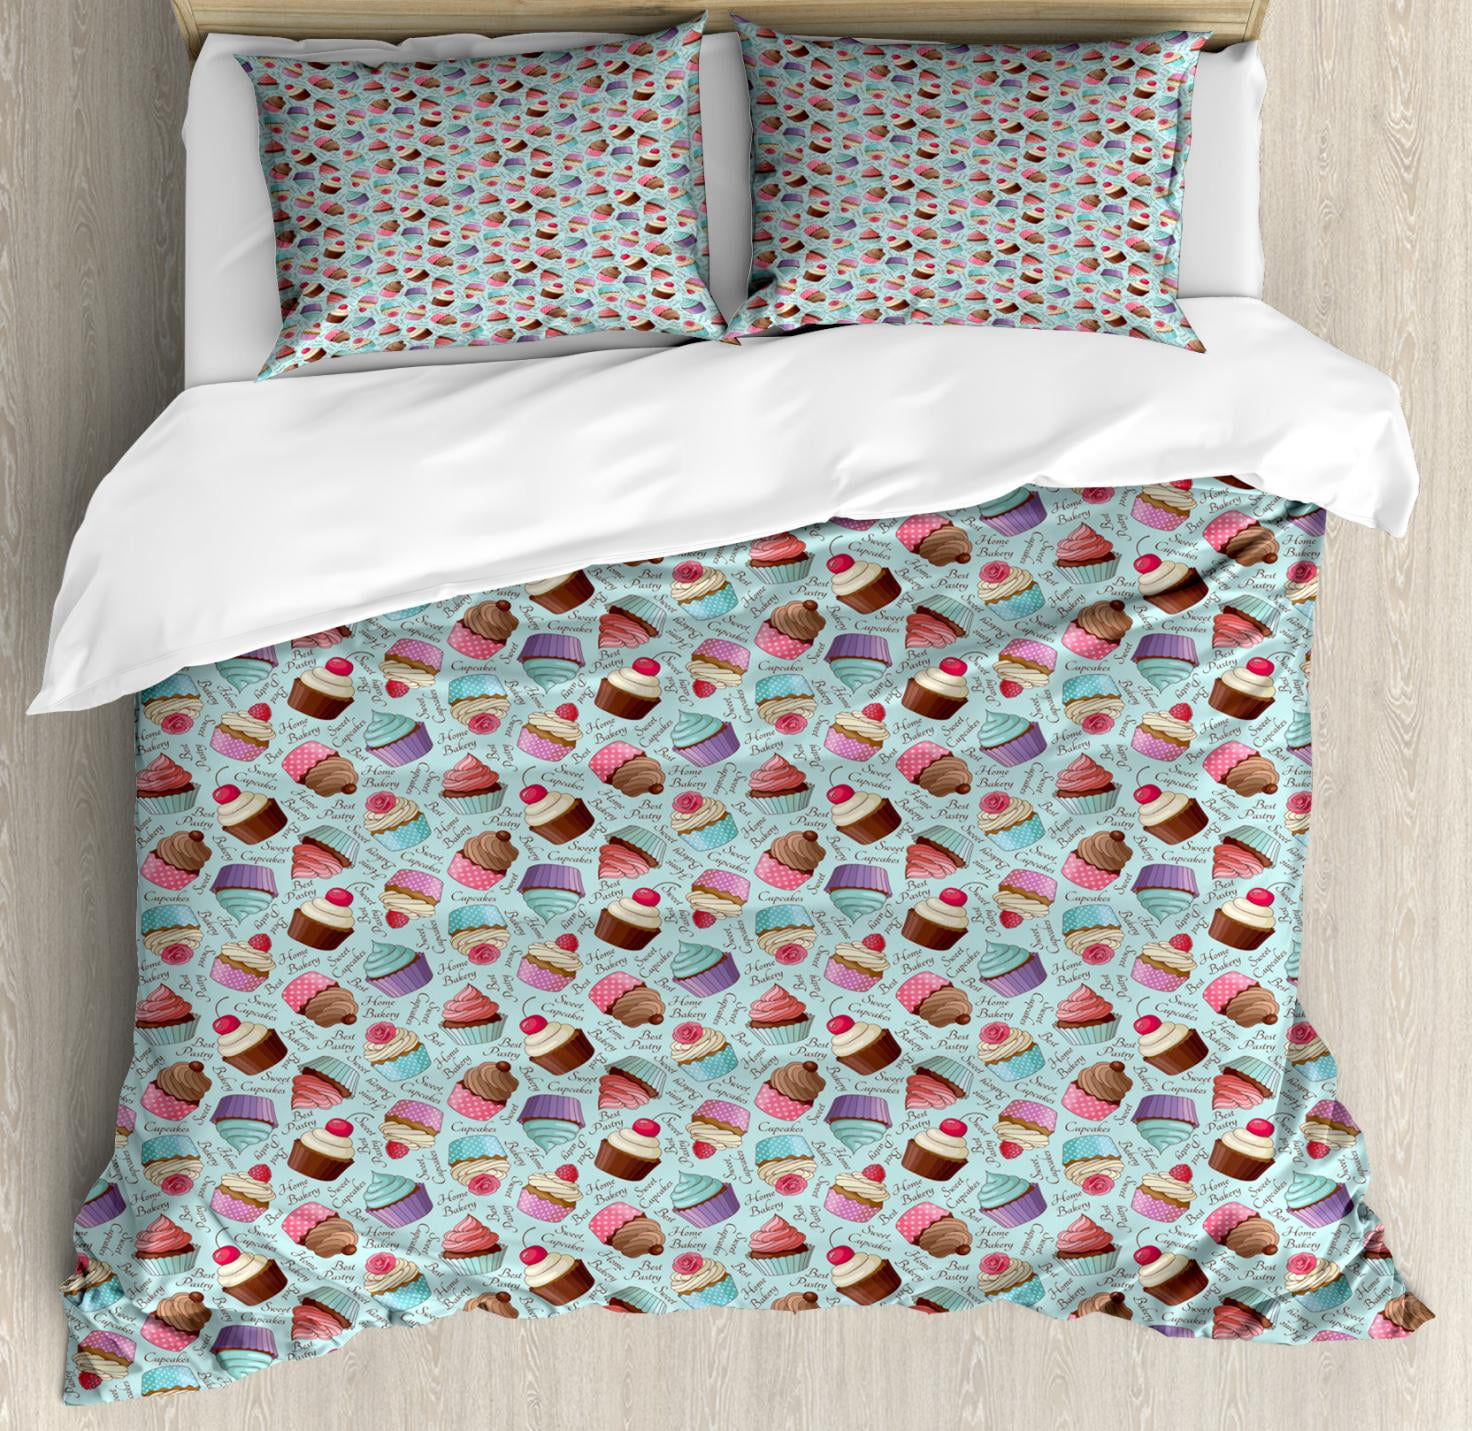 Cupcake Duvet Cover Set King Size Home Bakery Theme Pastry Sweet